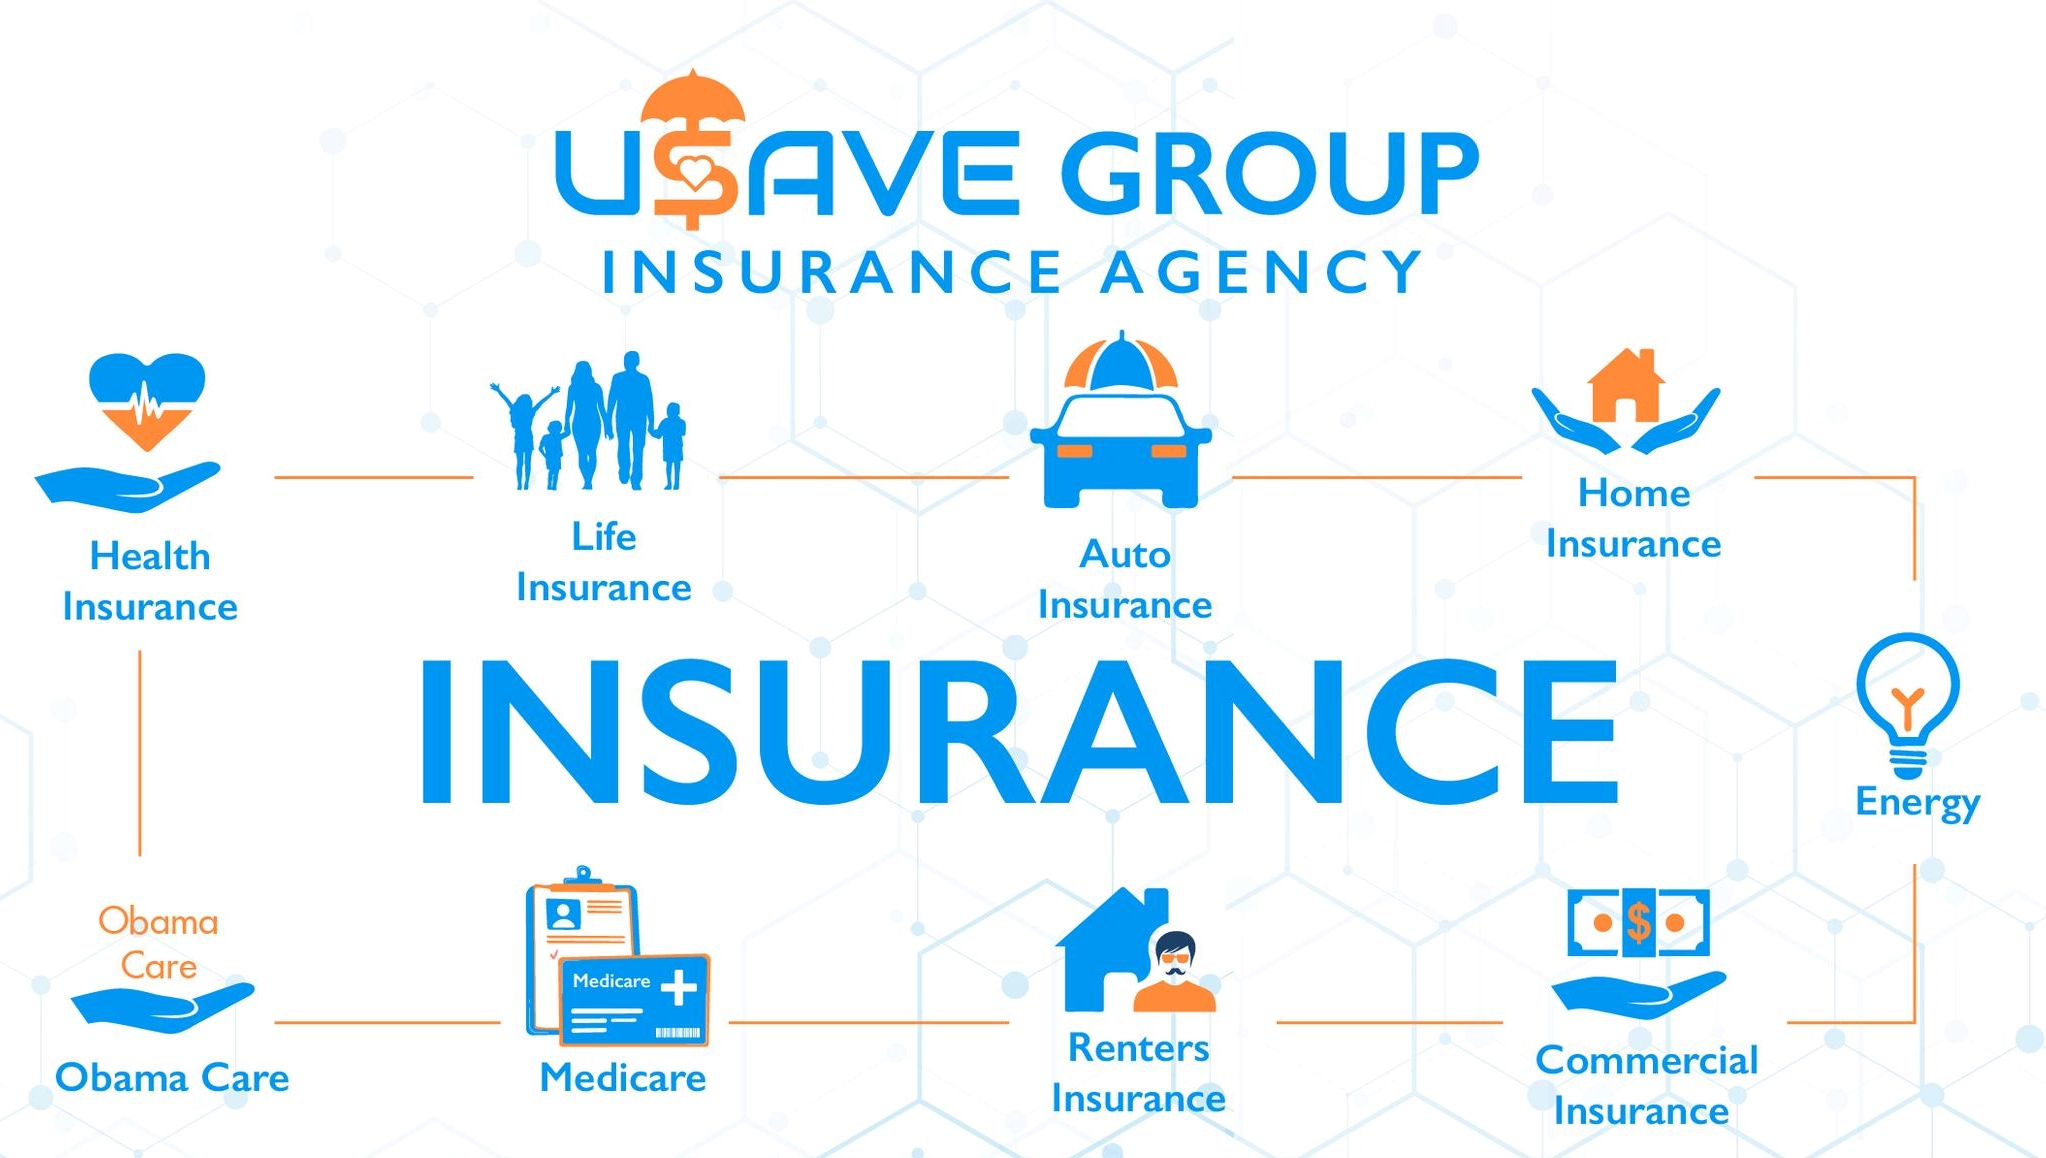 Why Usave Group